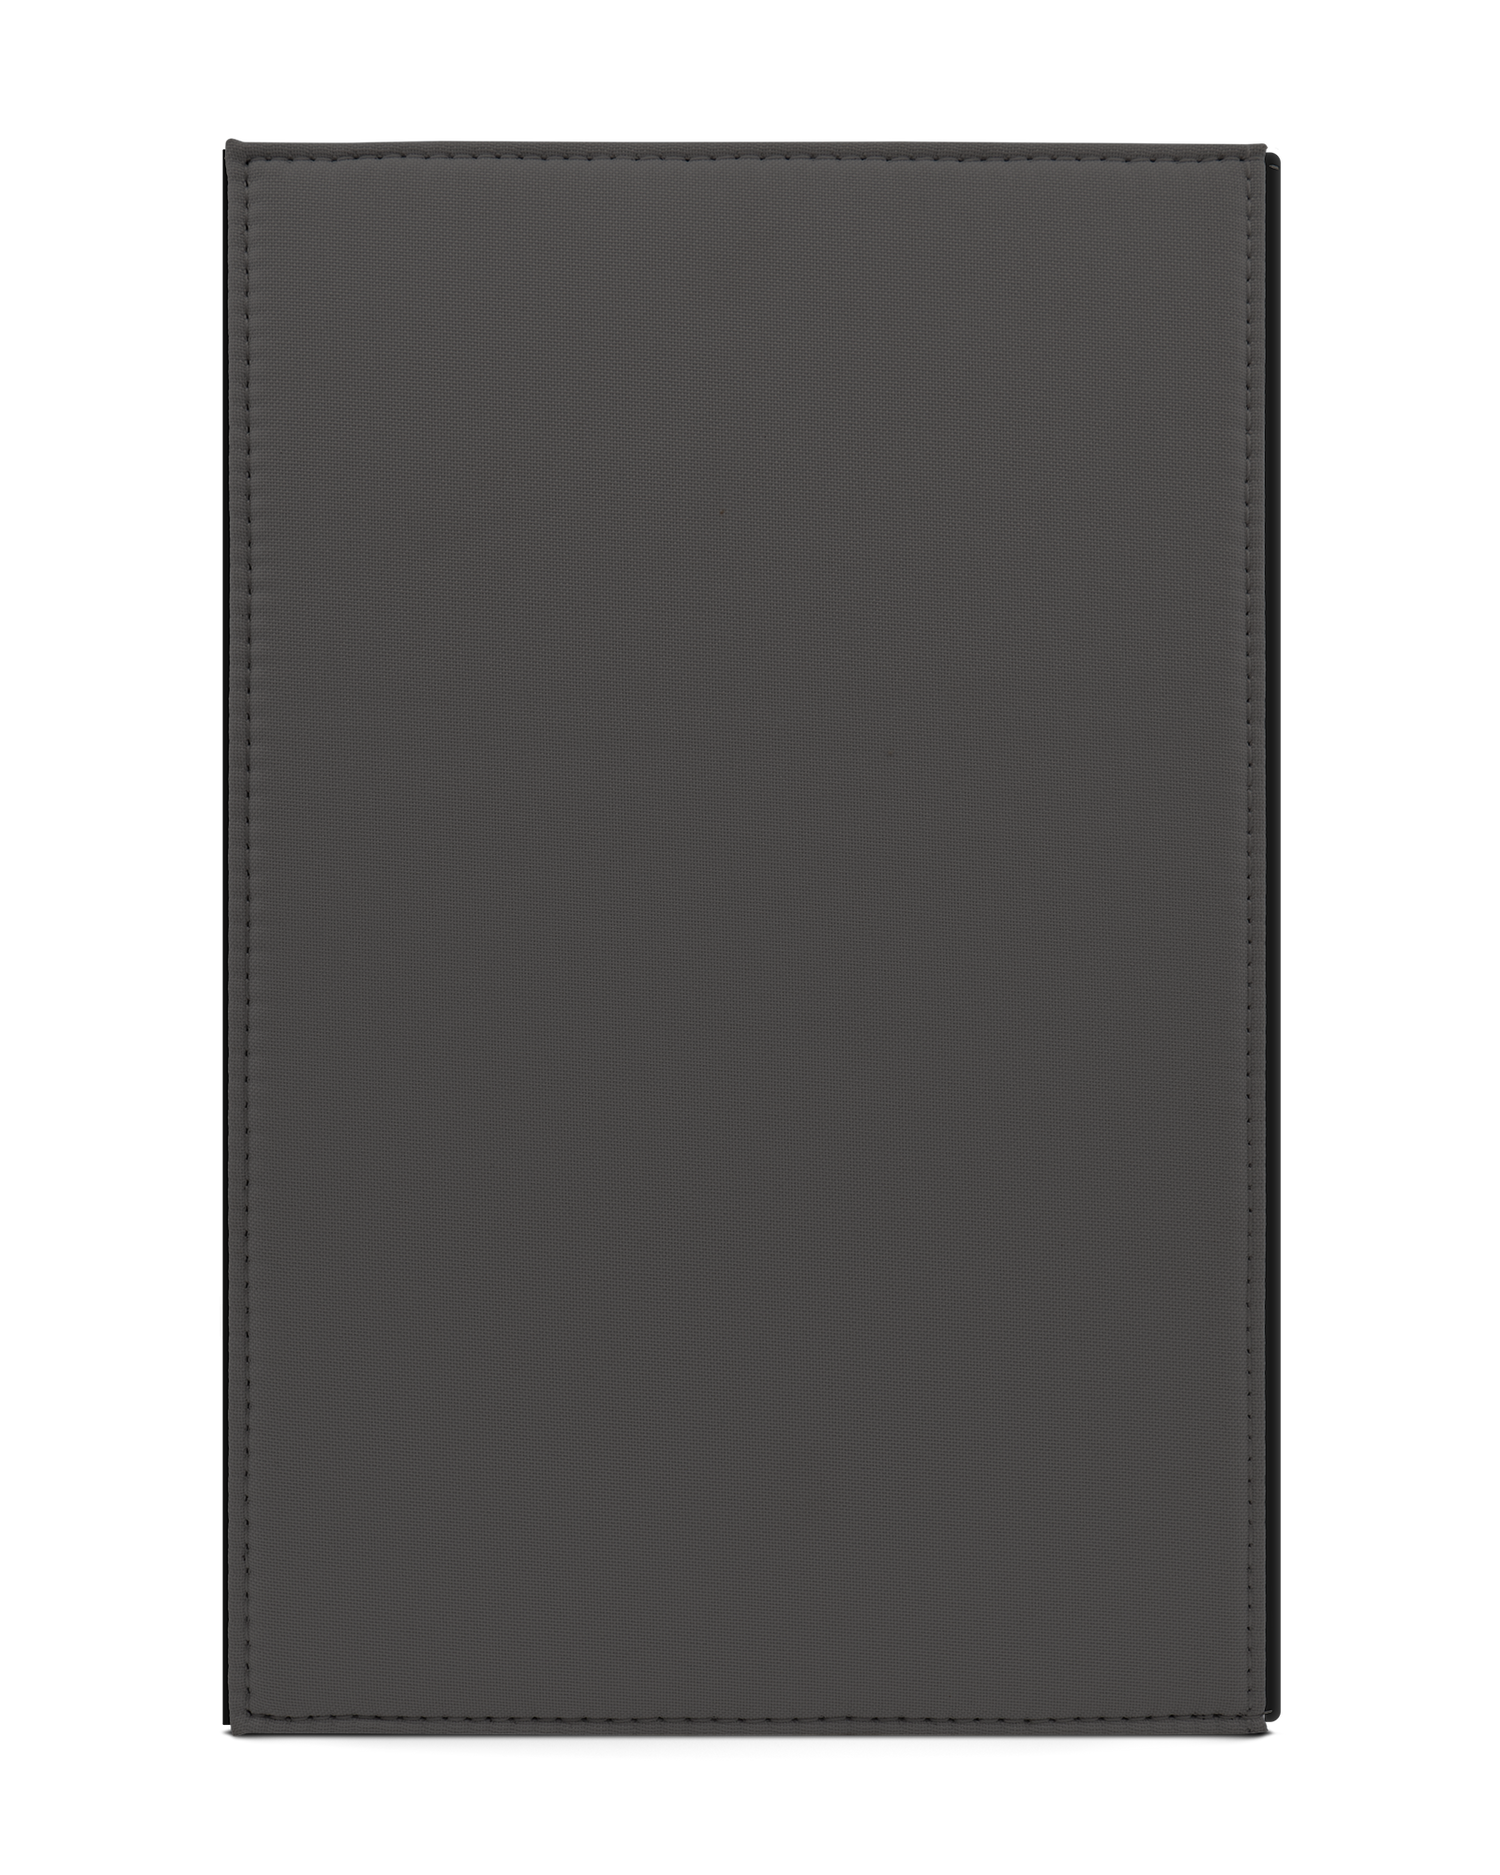 SPACE GREY Tablet Case L: Back View